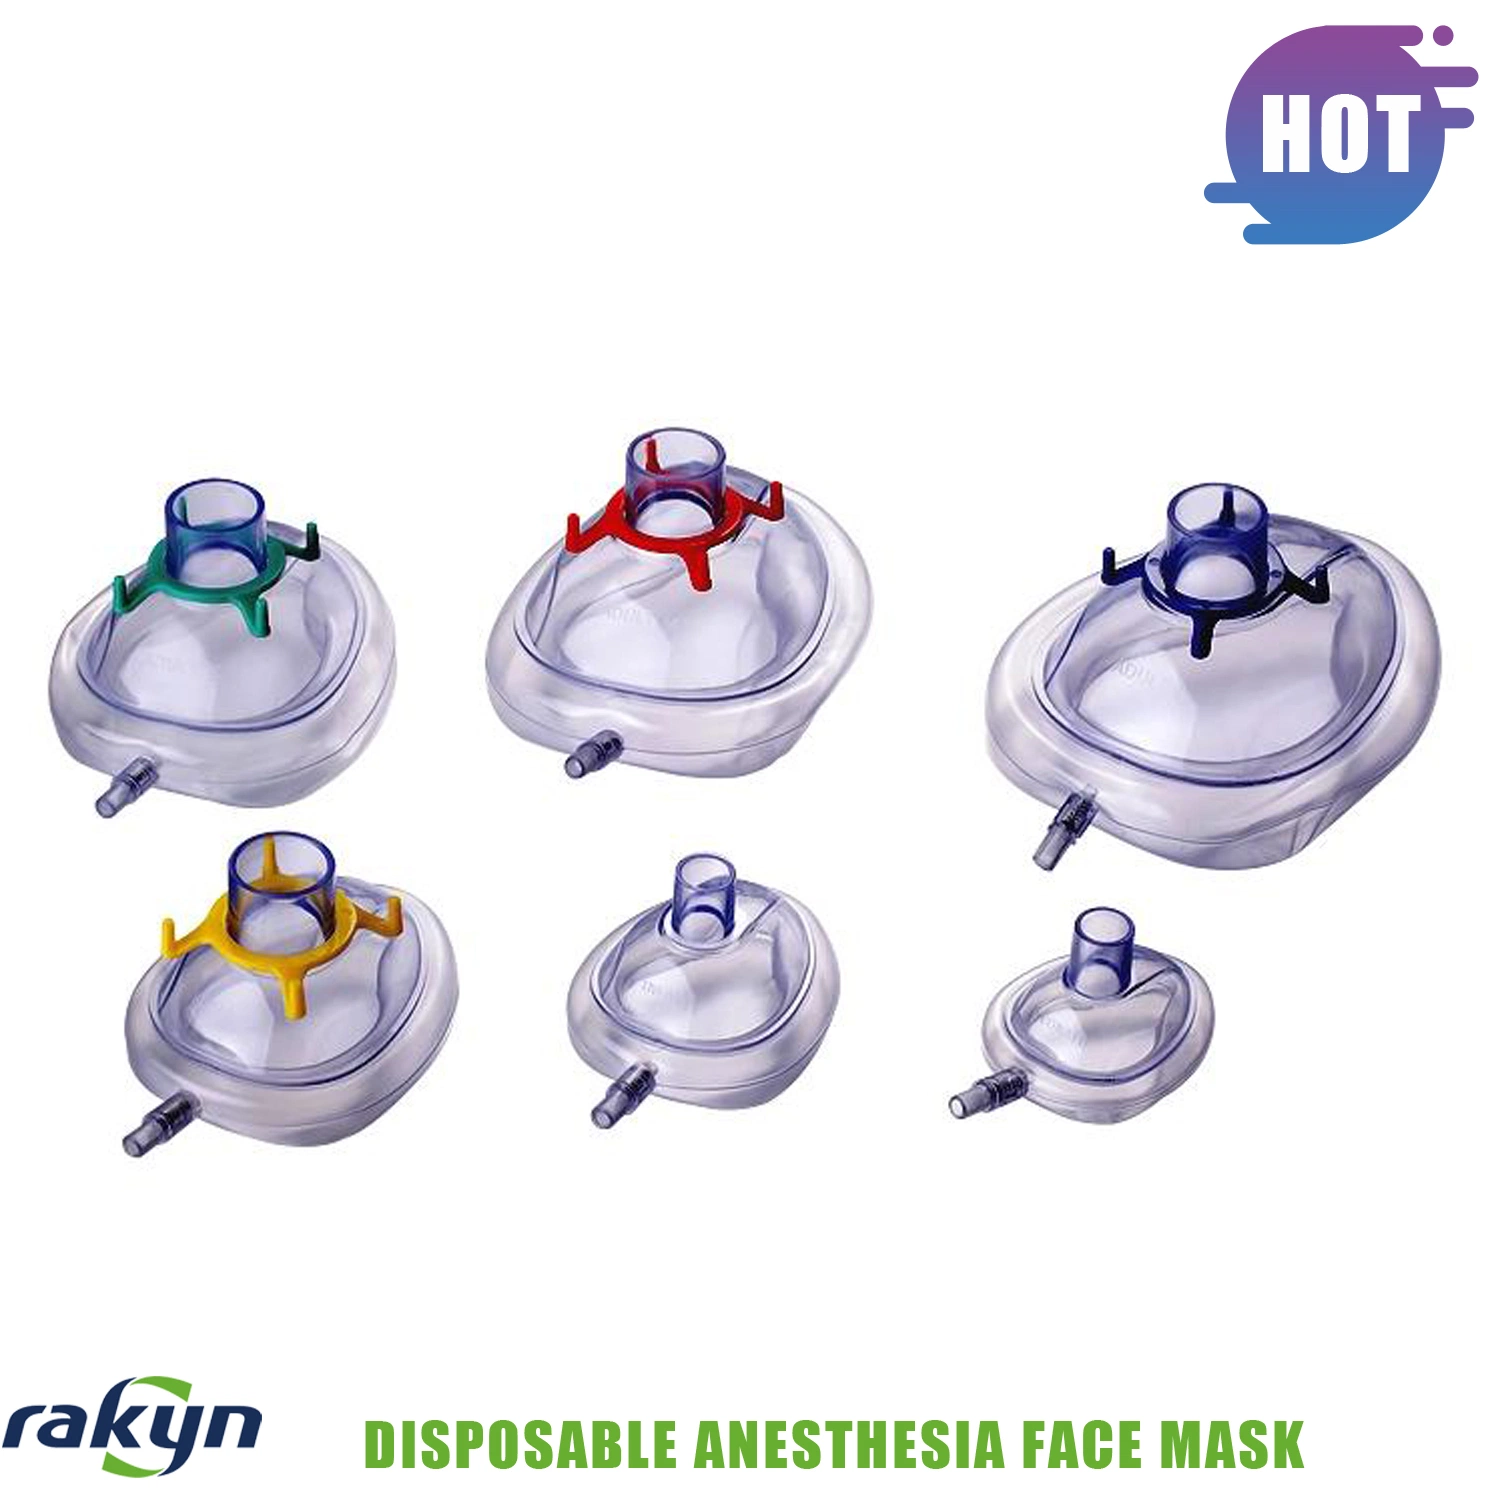 Medical PVC Disposable Anesthesia Face Mask Soft Air Cushion Oxygen Mask for Adults, Infant, Pediatric, Neonate with Check Valve